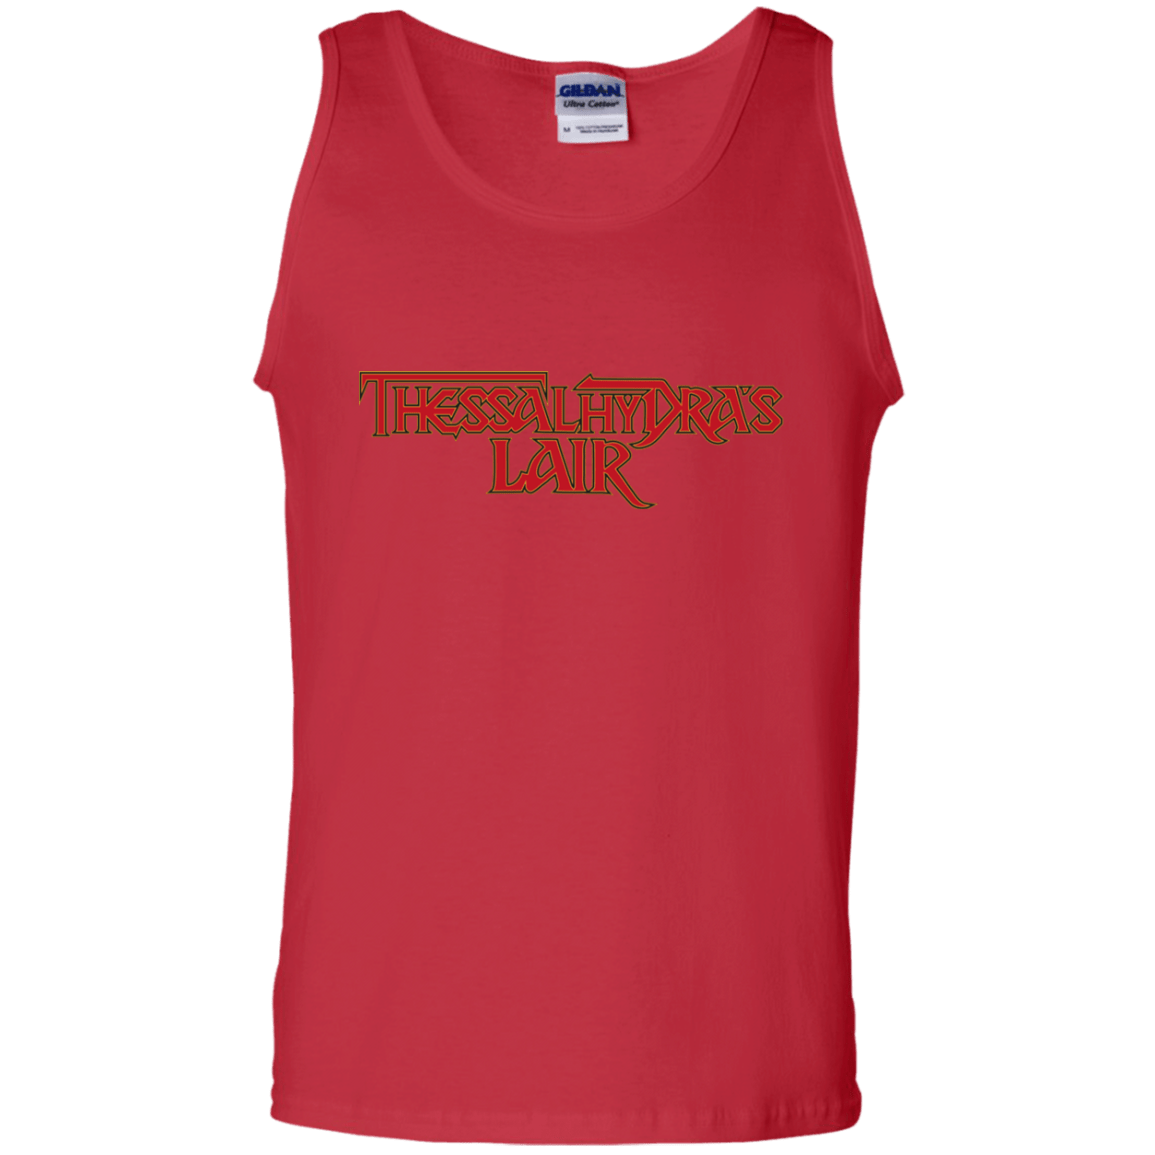 T-Shirts Red / S Thessalhydras Lair Men's Tank Top